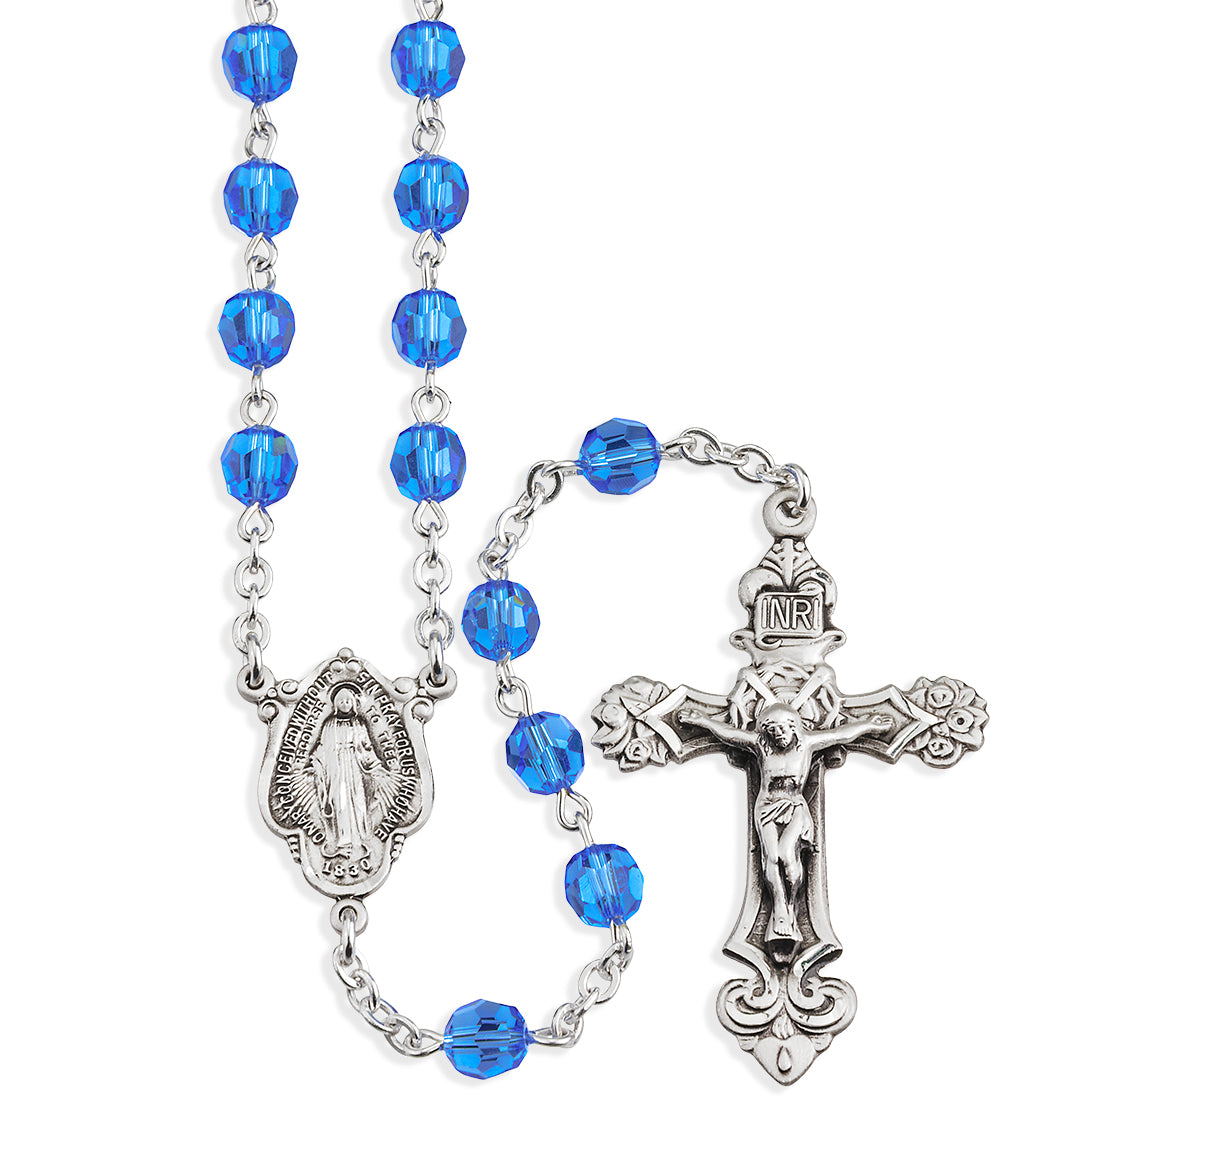 Rosary Sterling Crucifix and Centerpiece Created with Swarovski Crystal 6mm Faceted Round Sapphire Beads by HMH